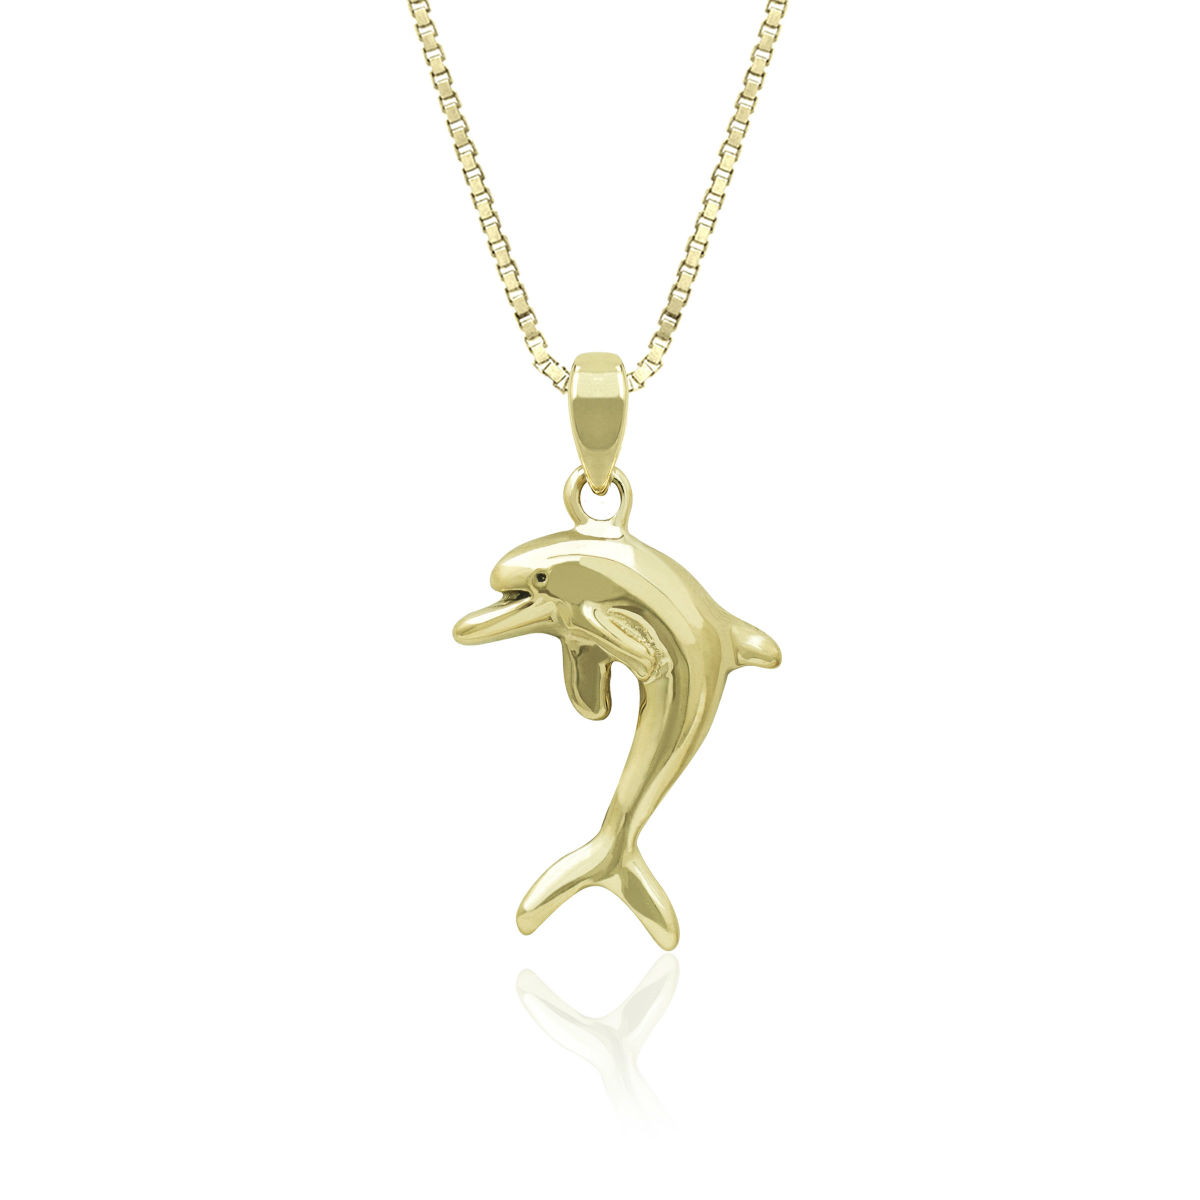 Details about   14K Yellow Gold Dolphin Charm Pendant MSRP $338